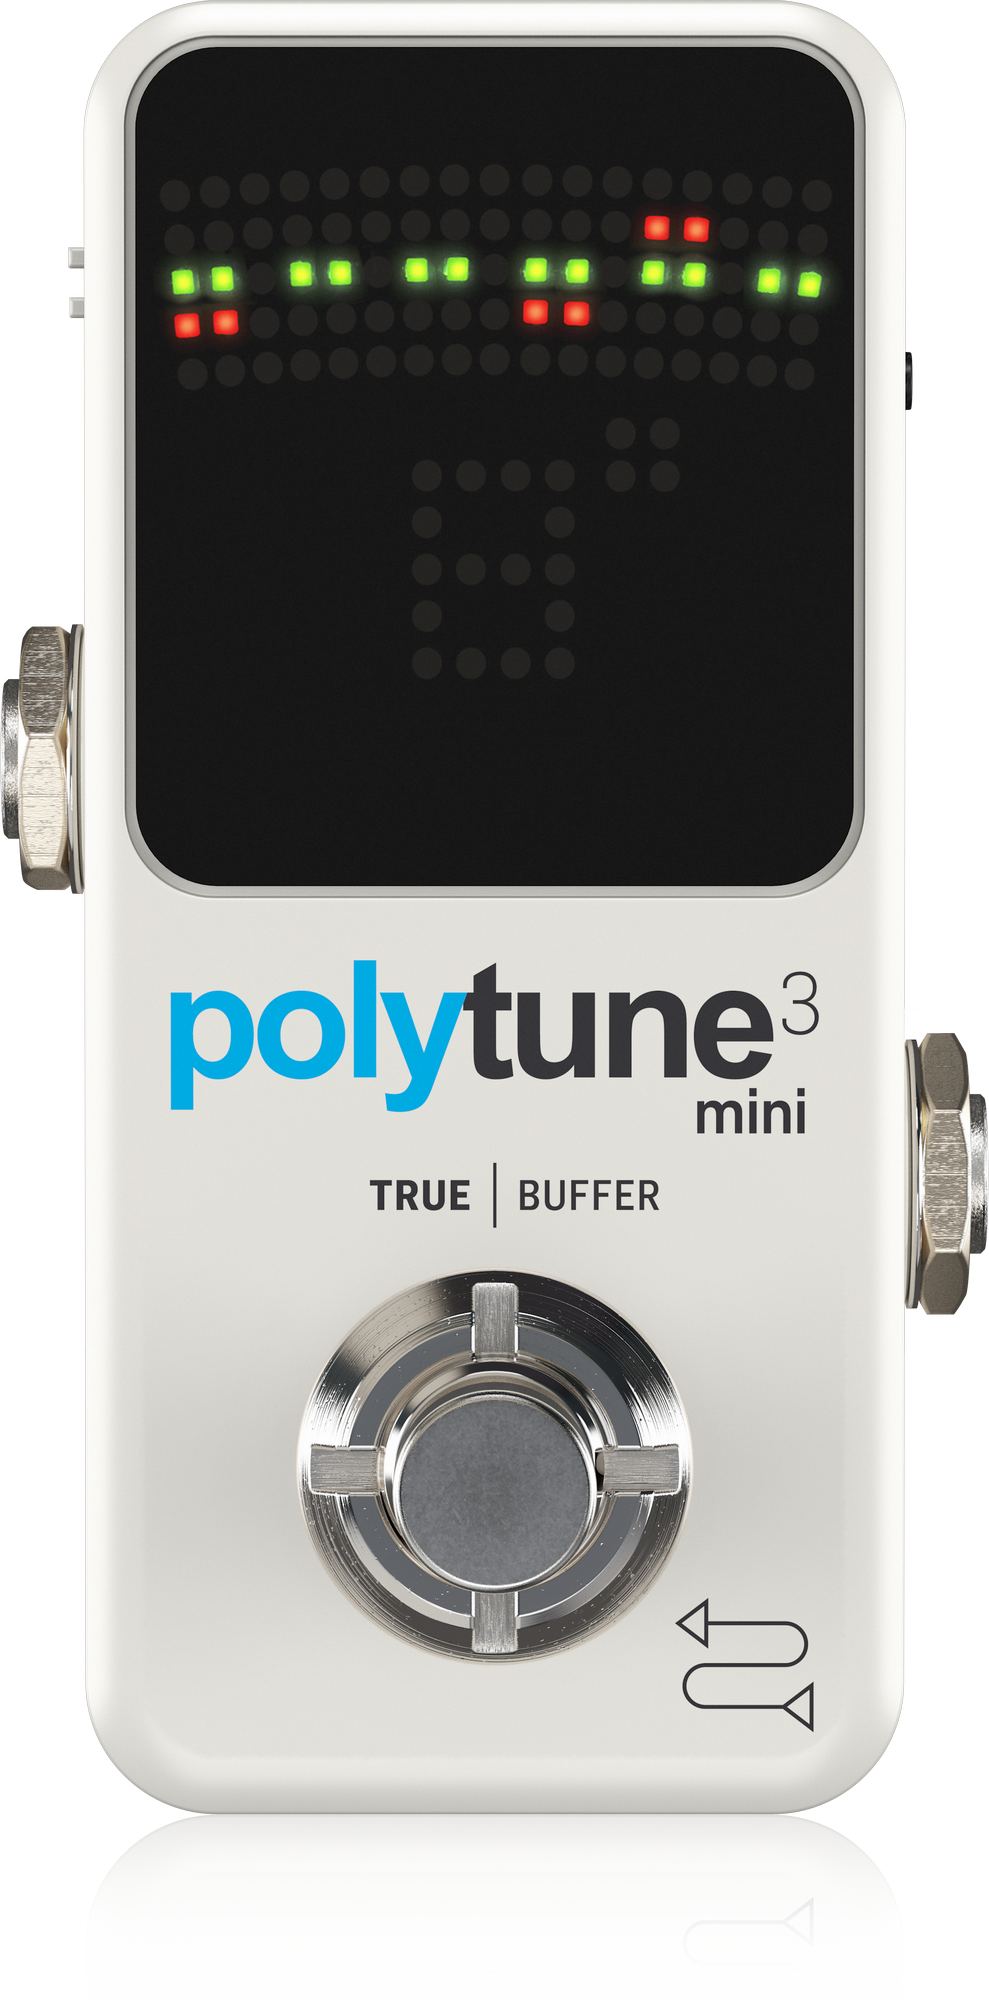 TC Electronic Polytune 3 Mini Tiny Polyphonic Tuner With Multiple Tuning Modes And Built-in Bonafide Buffer, TC ELECTRONIC, TUNER & METRONOME, tc-electronic-tuner-metronome-tc-polytune-3-mini, ZOSO MUSIC SDN BHD